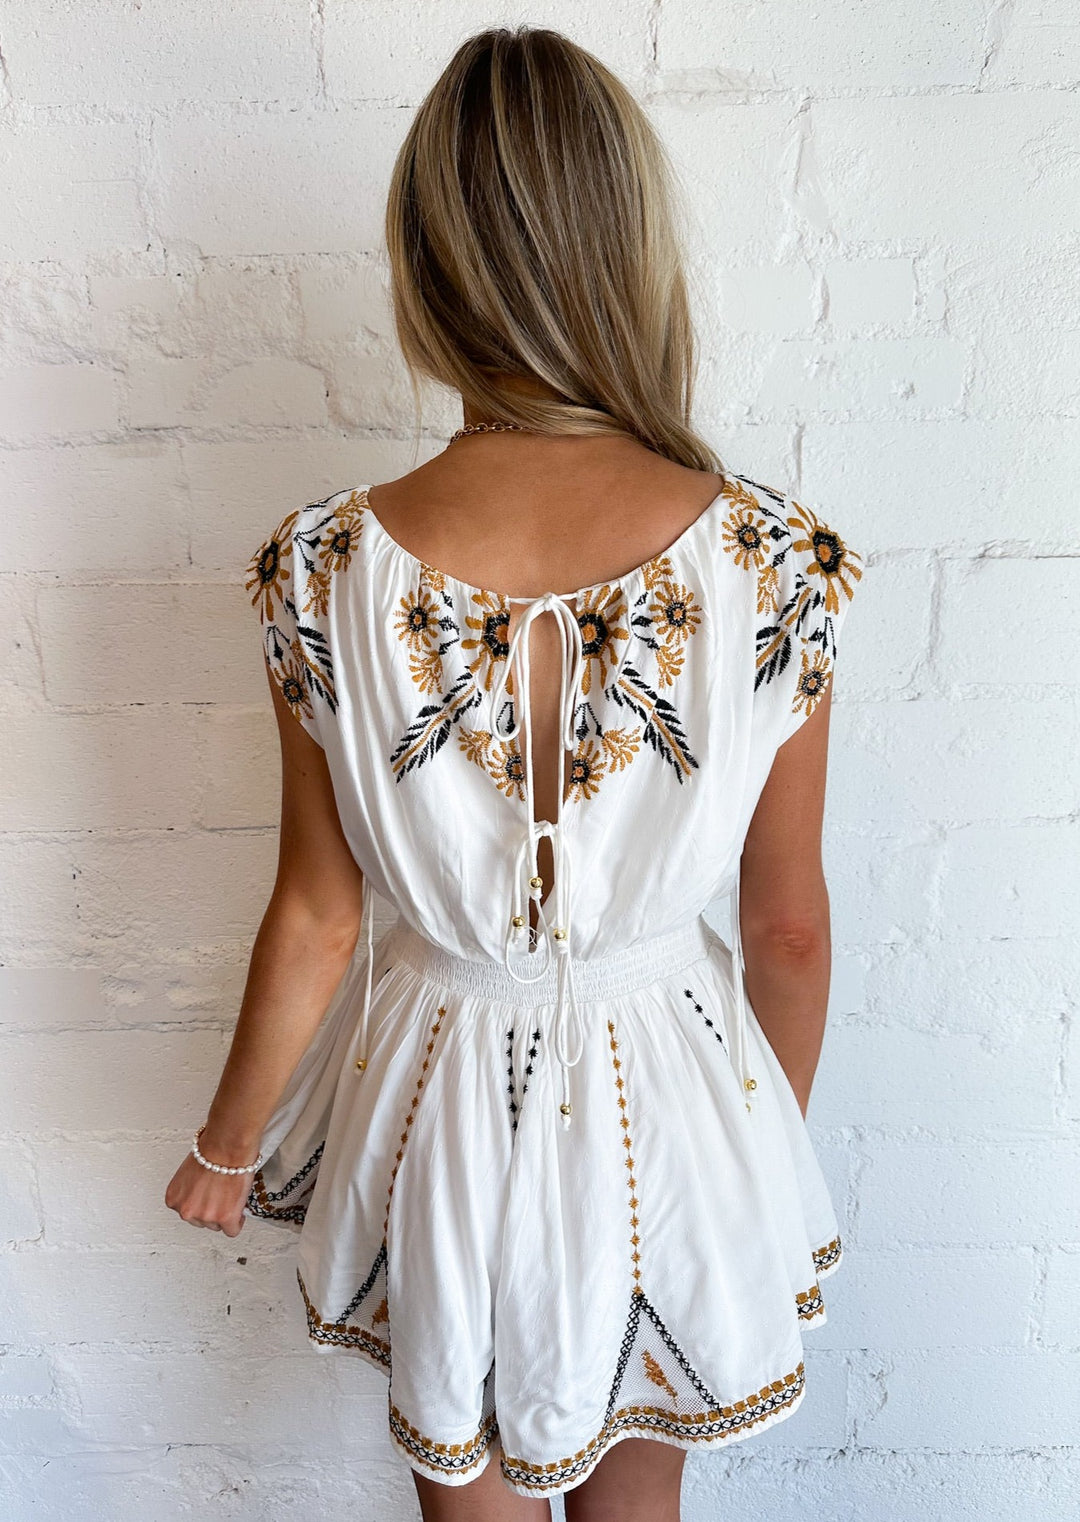 Catalina Romper, romper, Free People, Adeline, dallas boutique, dallas texas, texas boutique, women's boutique dallas, adeline boutique, dallas boutique, trendy boutique, affordable boutique